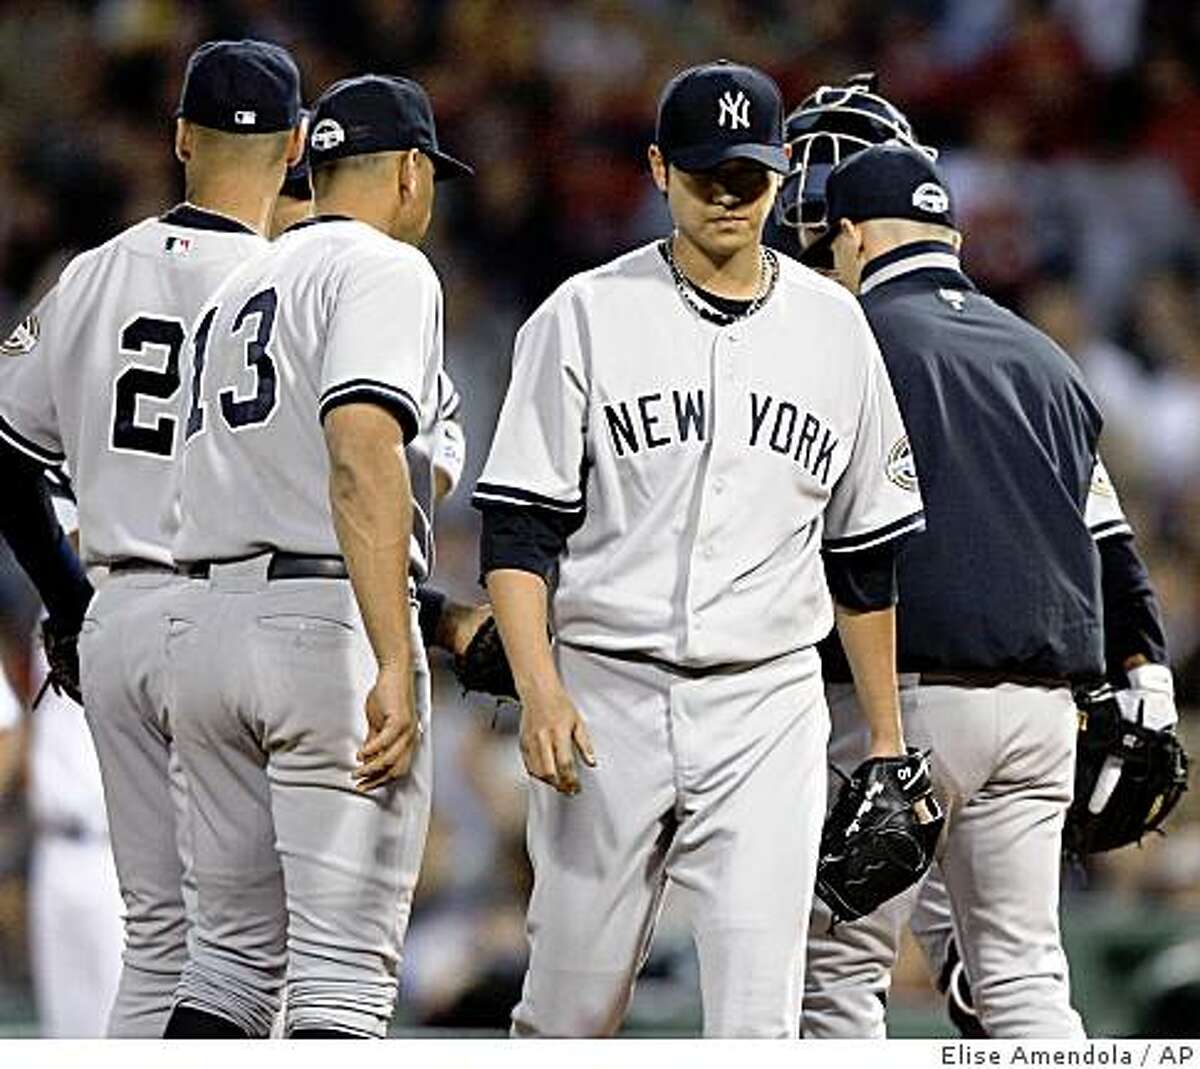 New York Yankees starting pitcher Chien-Ming Wang departs in the third inning against the Boston Red Sox during a baseball game at Fenway Park in Boston on Wednesday, June 10, 2009. (AP Photo/Elise Amendola)